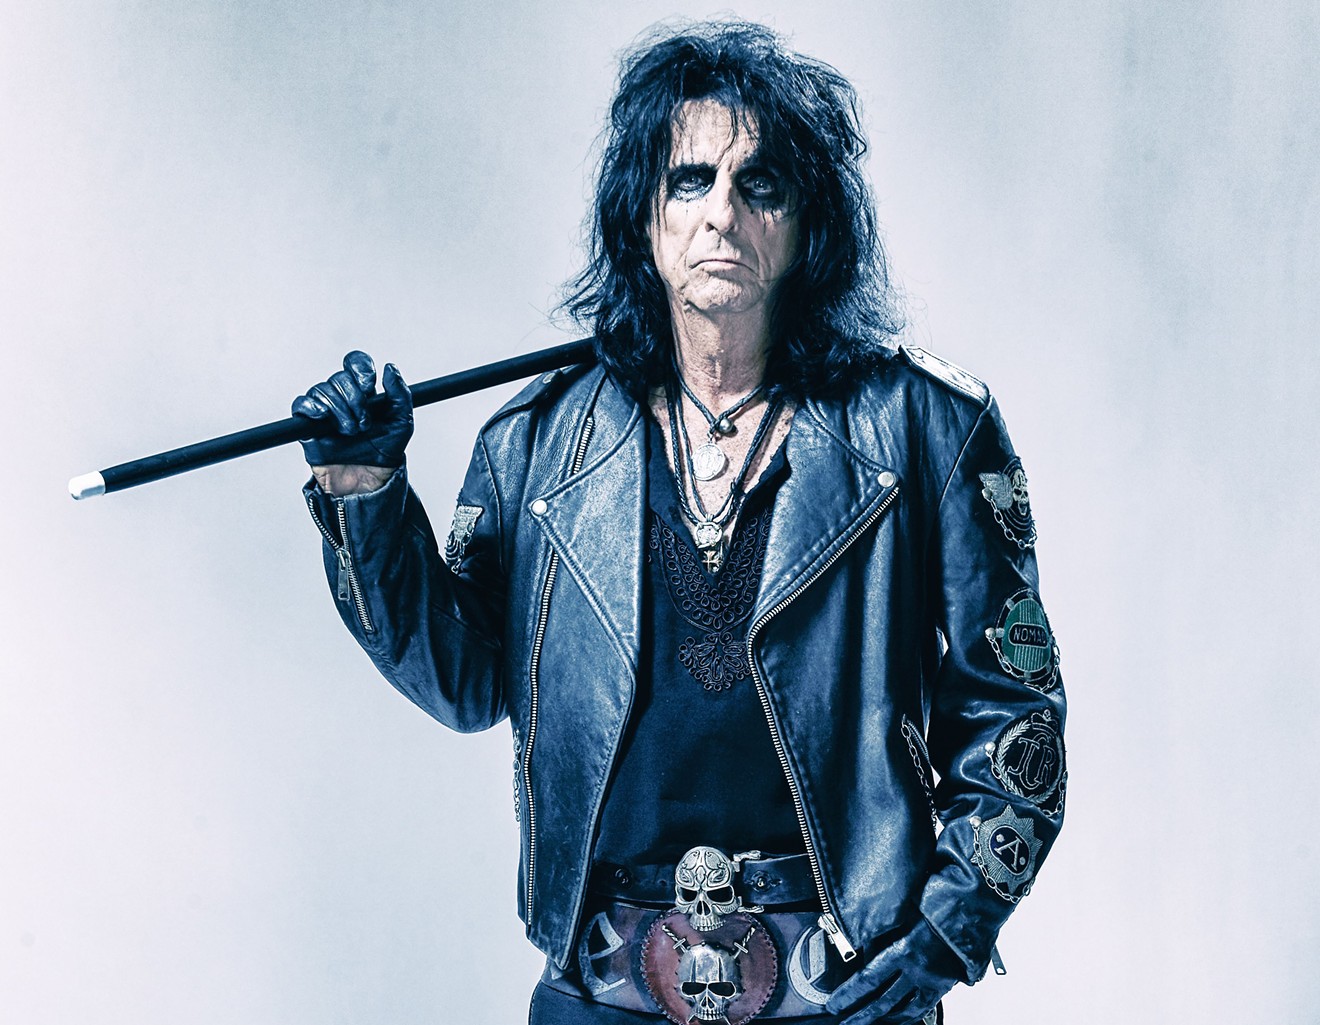 Alice Cooper plays the Paramount Theatre on Monday, June 12.